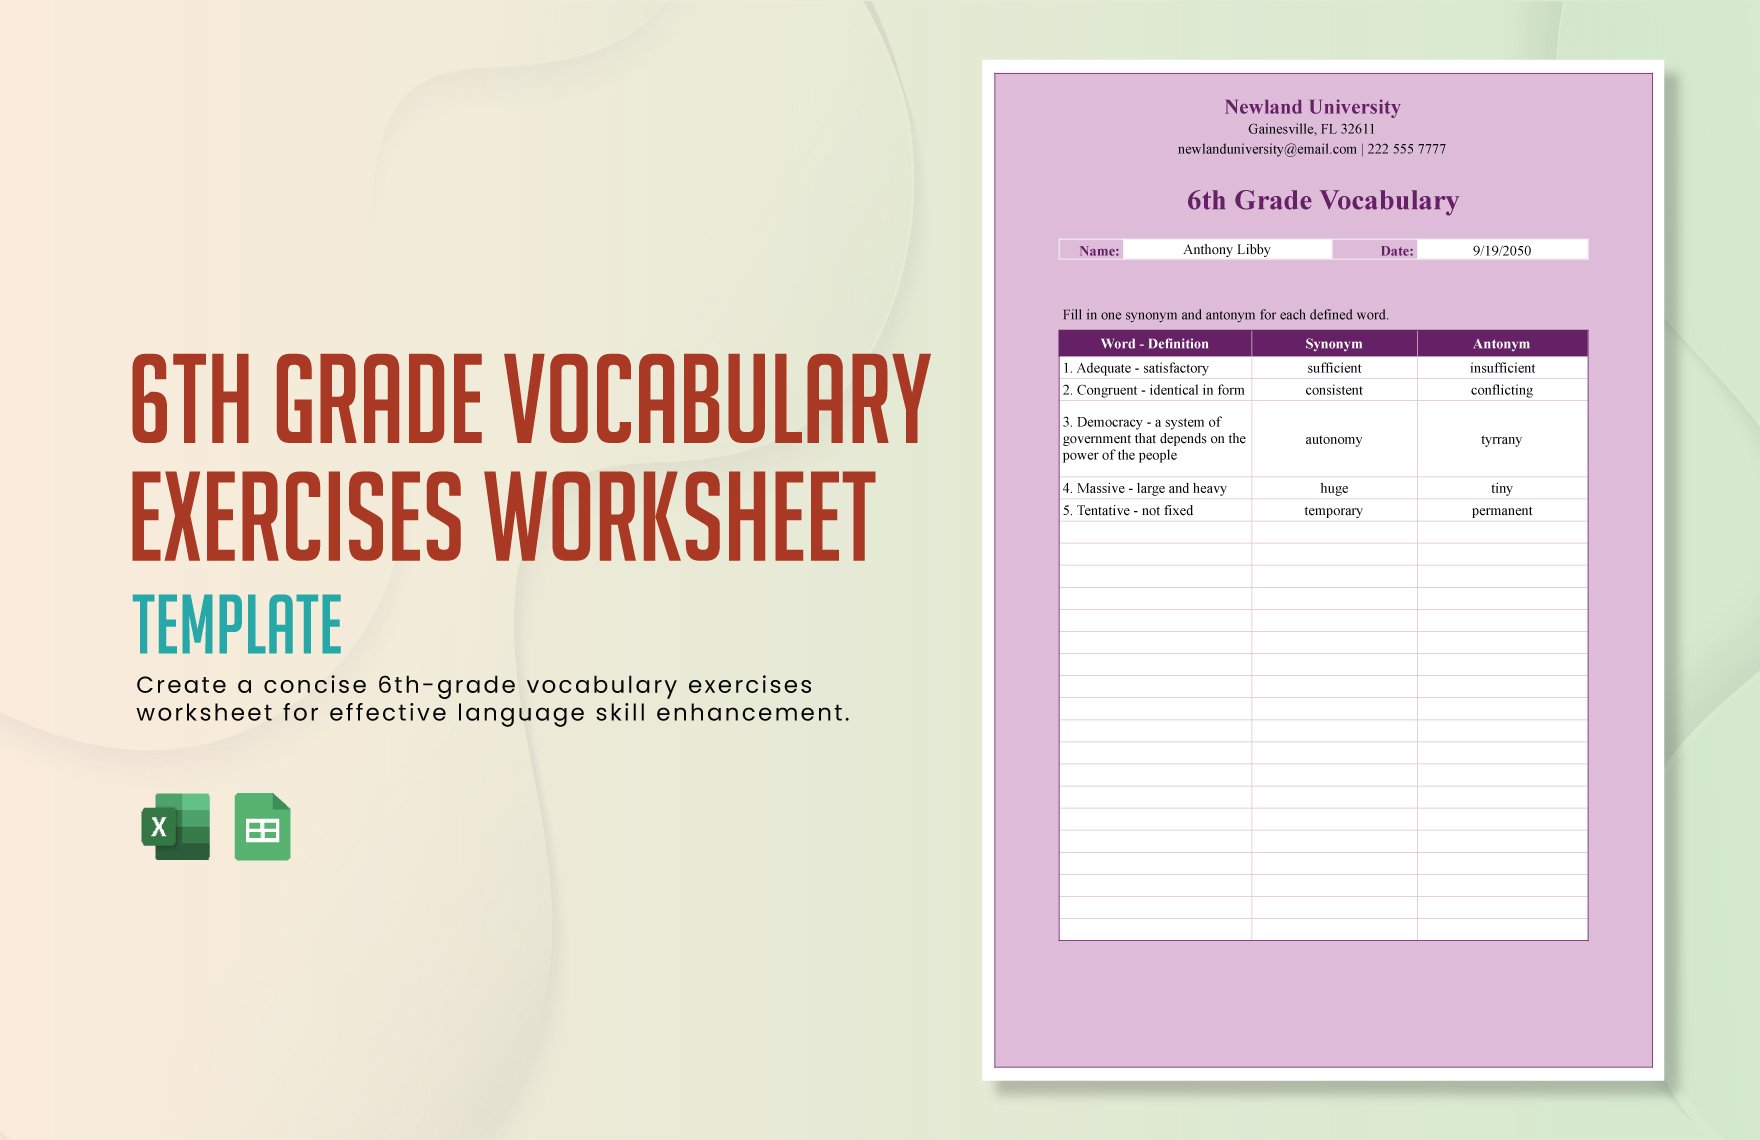 6th Grade Vocabulary Exercises Worksheet Template in Excel, Google Sheets